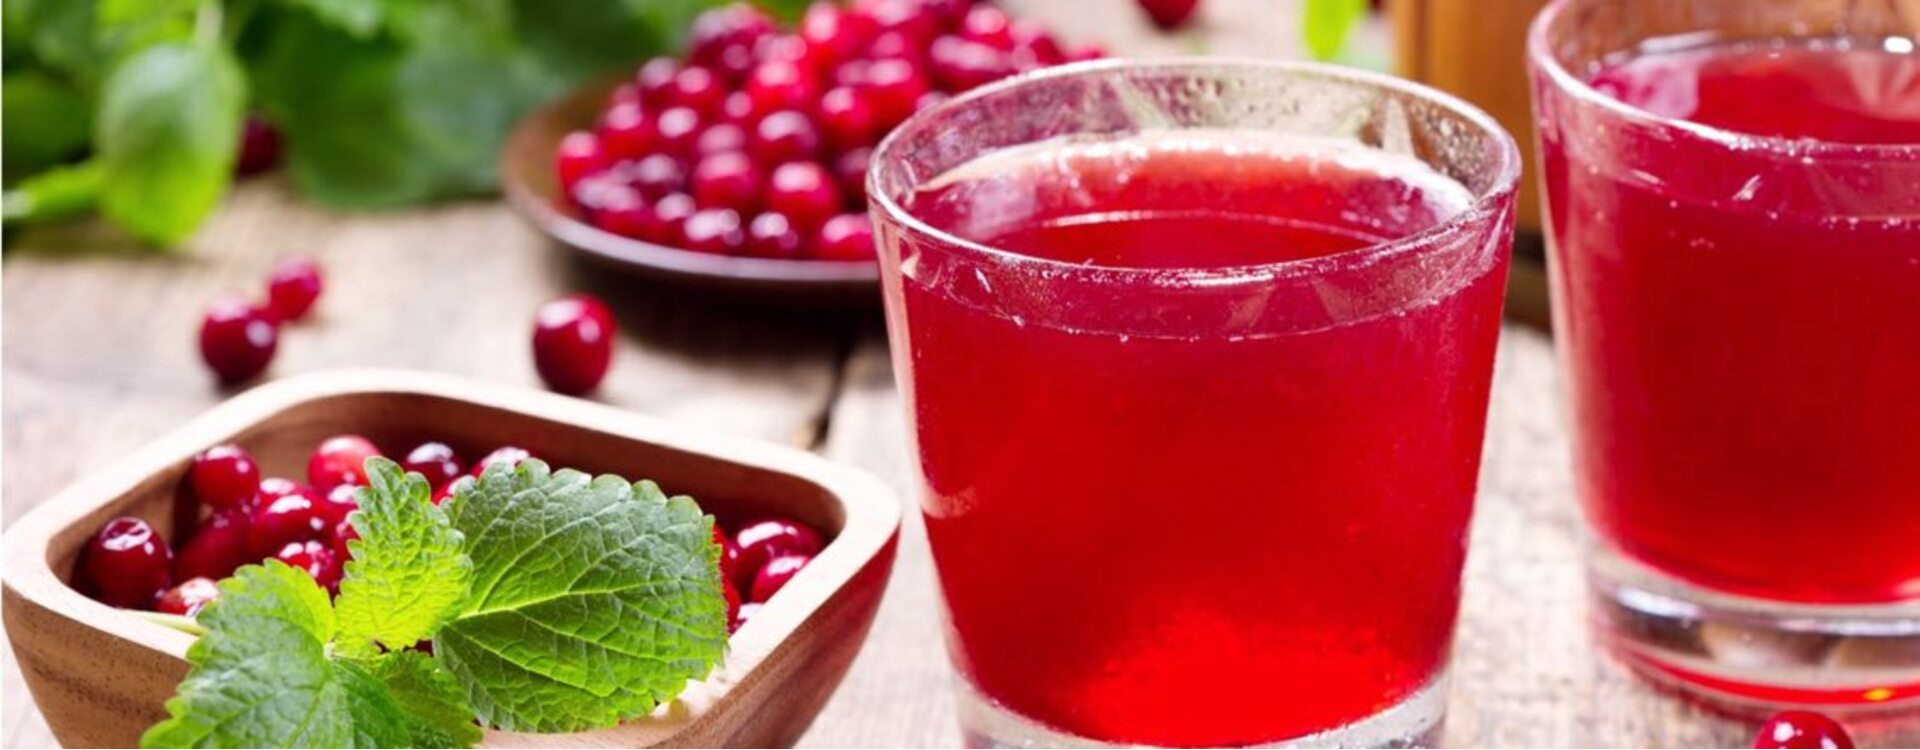 How to use cranberry juice?